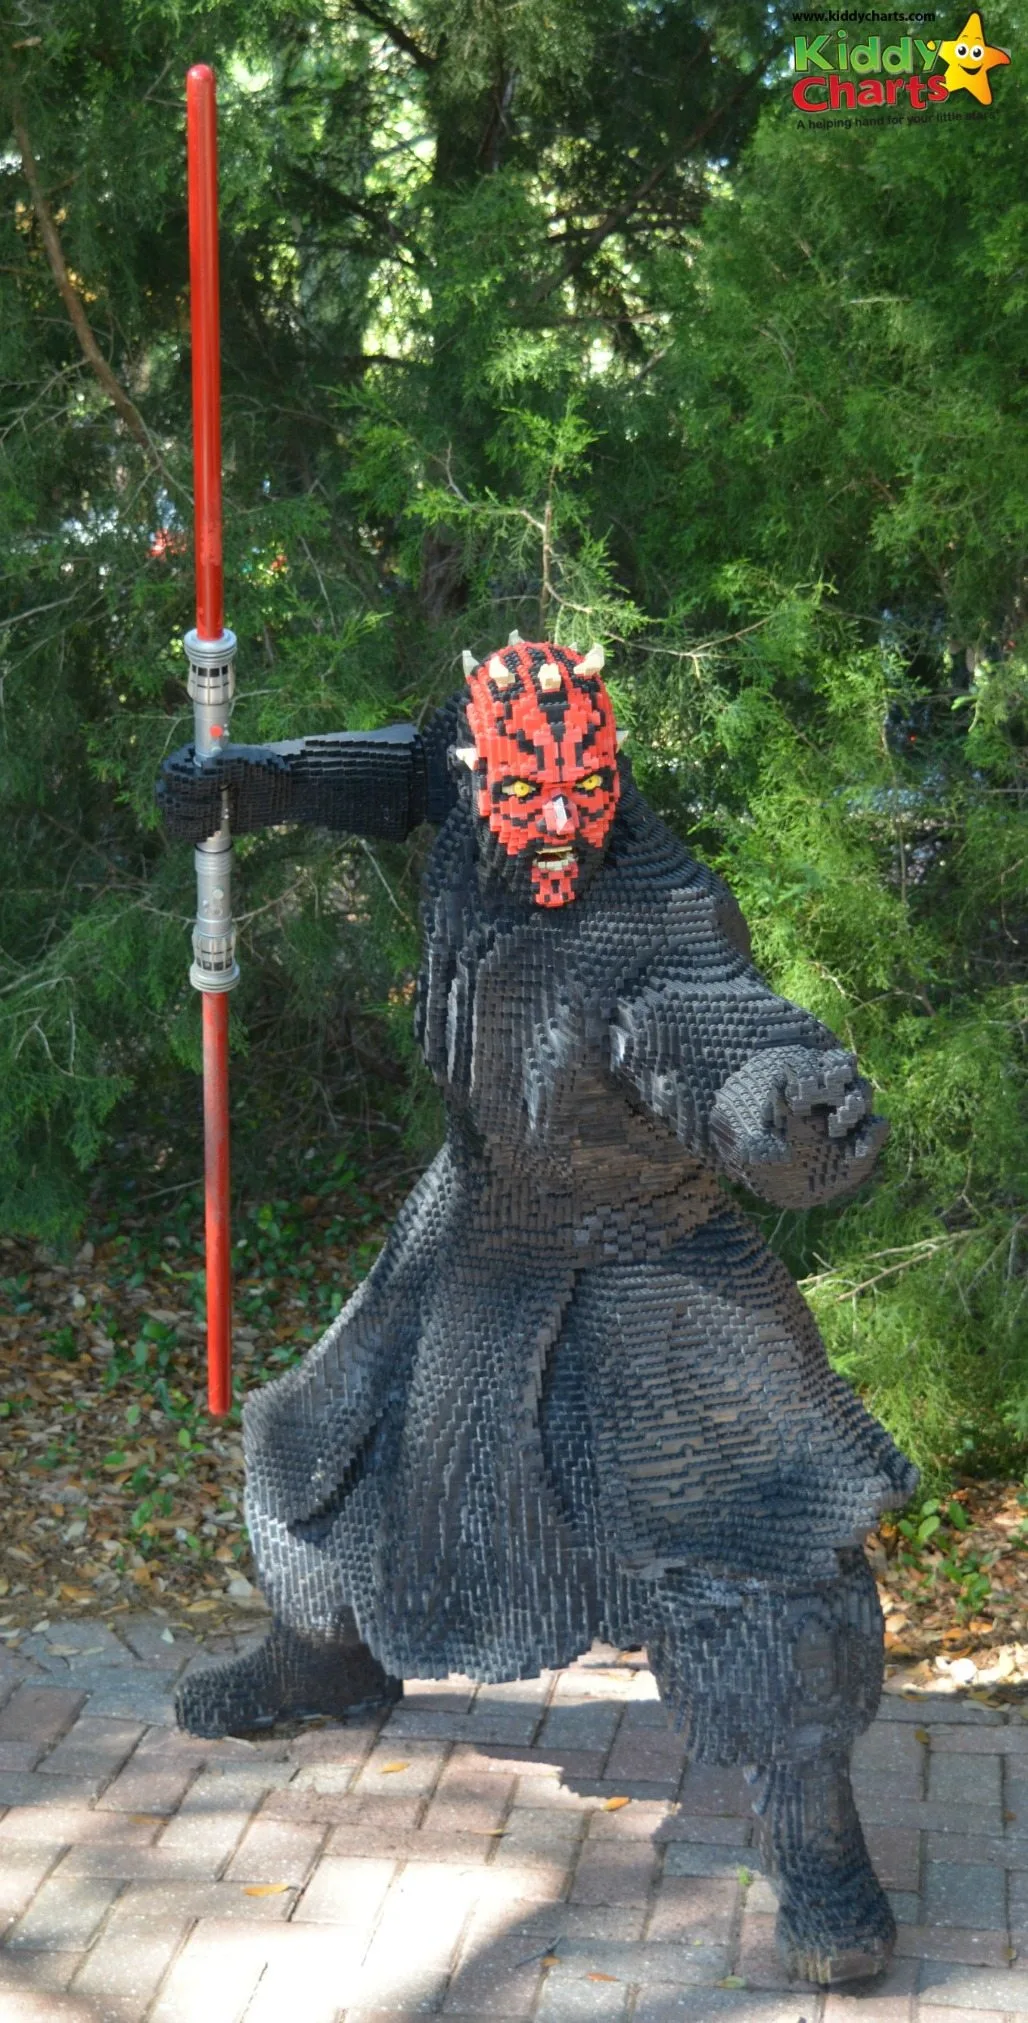 Darth Maul within the Legoland Florida Miniland is definitely one of MY favourites there...